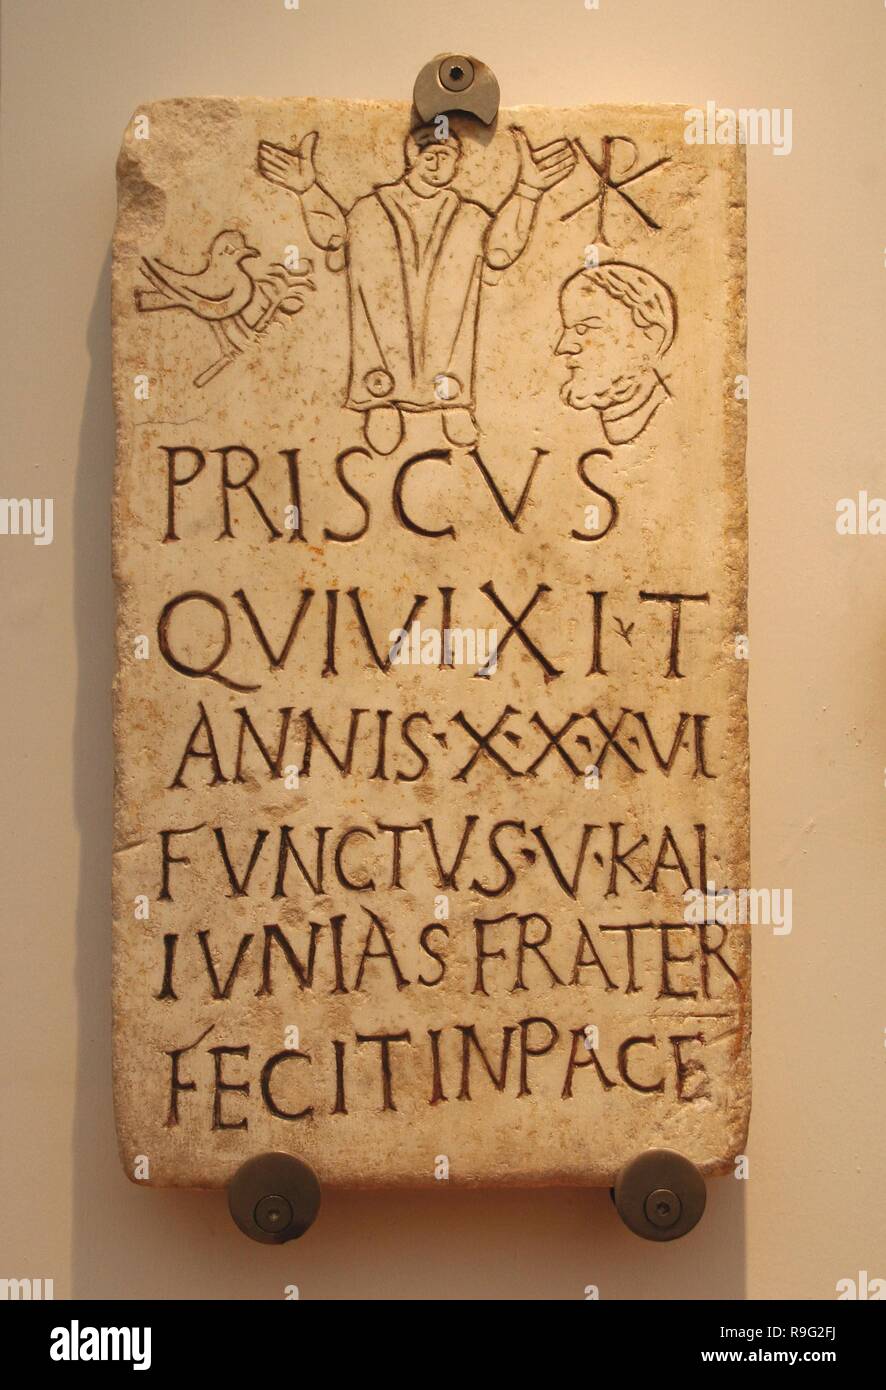 Italy. Early Christians. Roman funerary stele of Prisco. Inscription: Christian phrase appears 'in pace'. The symbol of the dove and the olive branch and the monogram of Constantine T. 4th century AD. Baths of Diocletian, part of the National Roman Museum Rome. Italy. Stock Photo